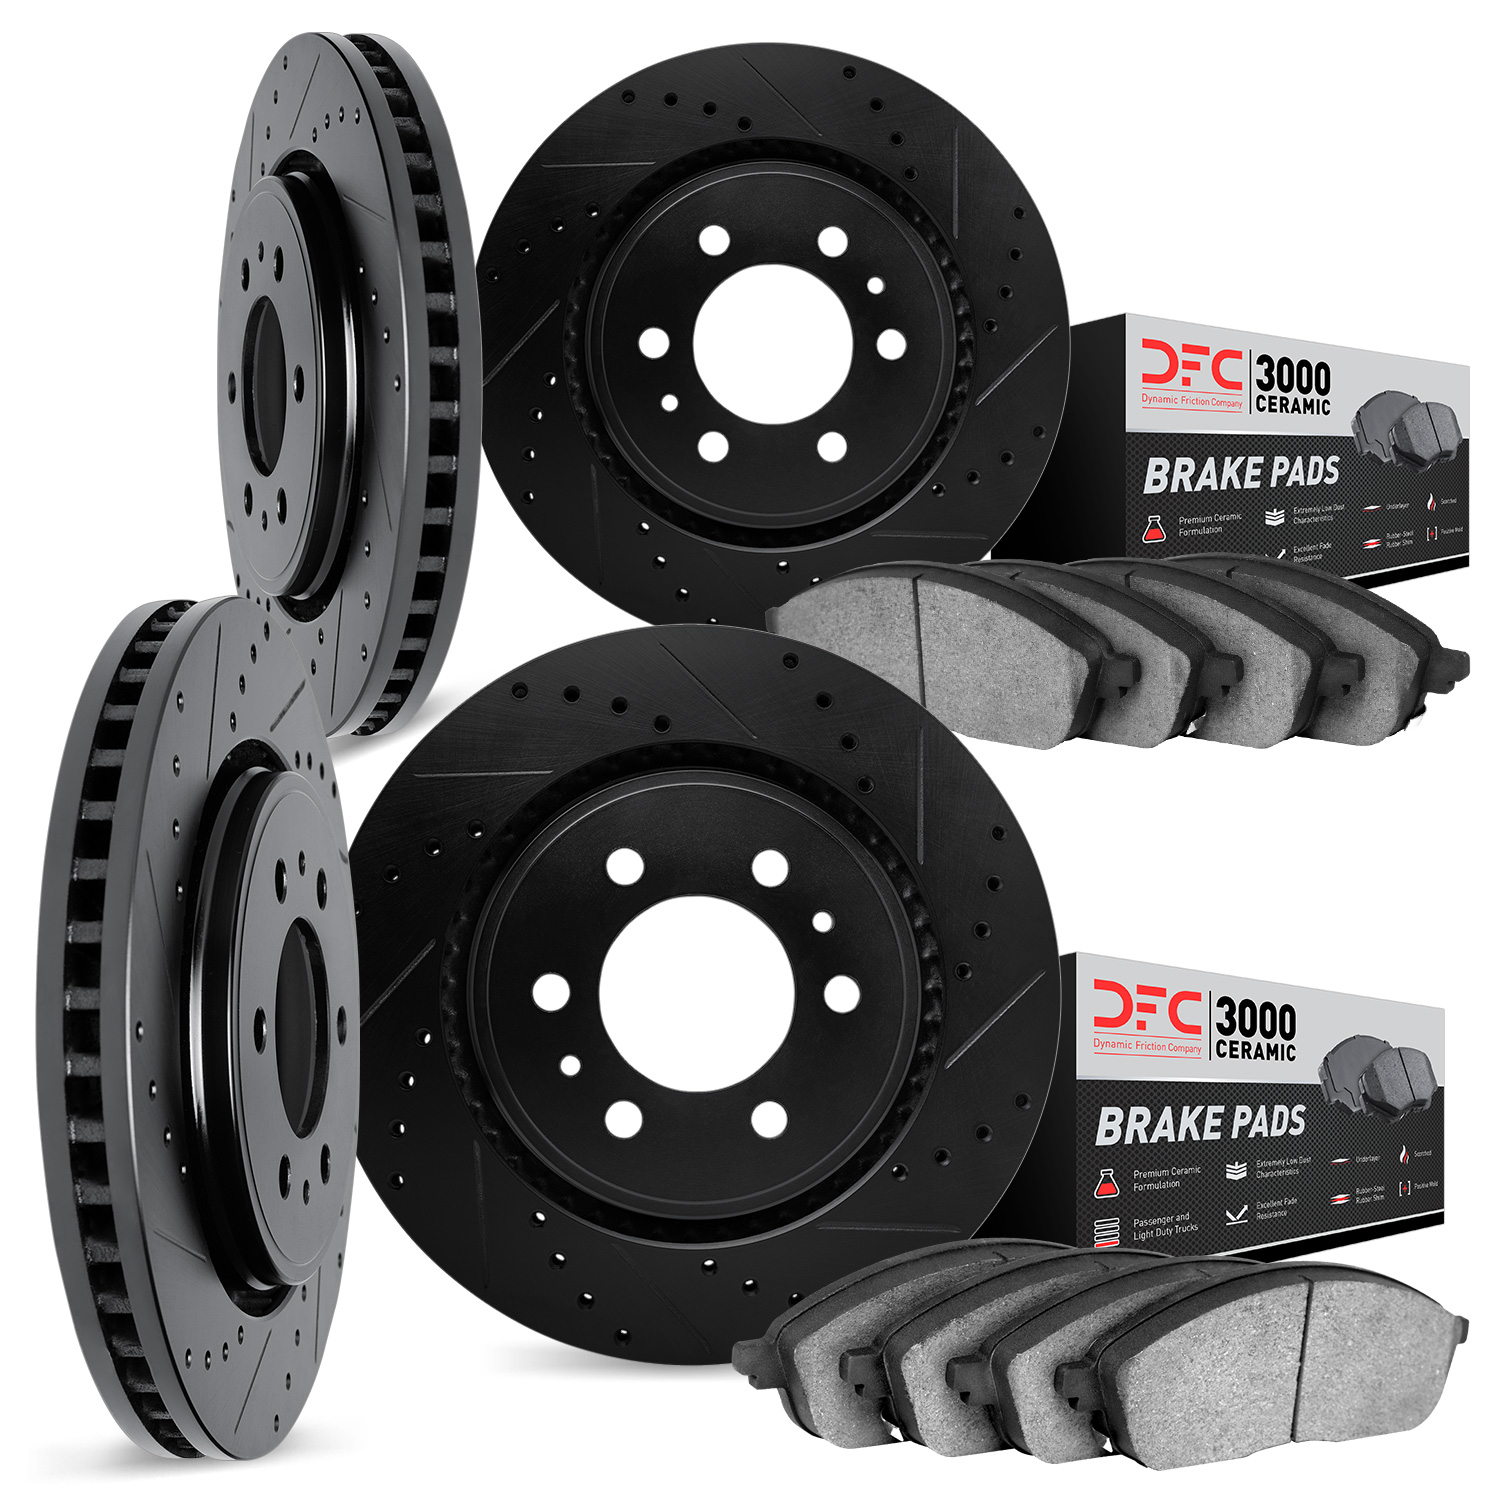 8304-76069 Drilled/Slotted Brake Rotors with 3000-Series Ceramic Brake Pads Kit [Black], Fits Select Lexus/Toyota/Scion, Positio